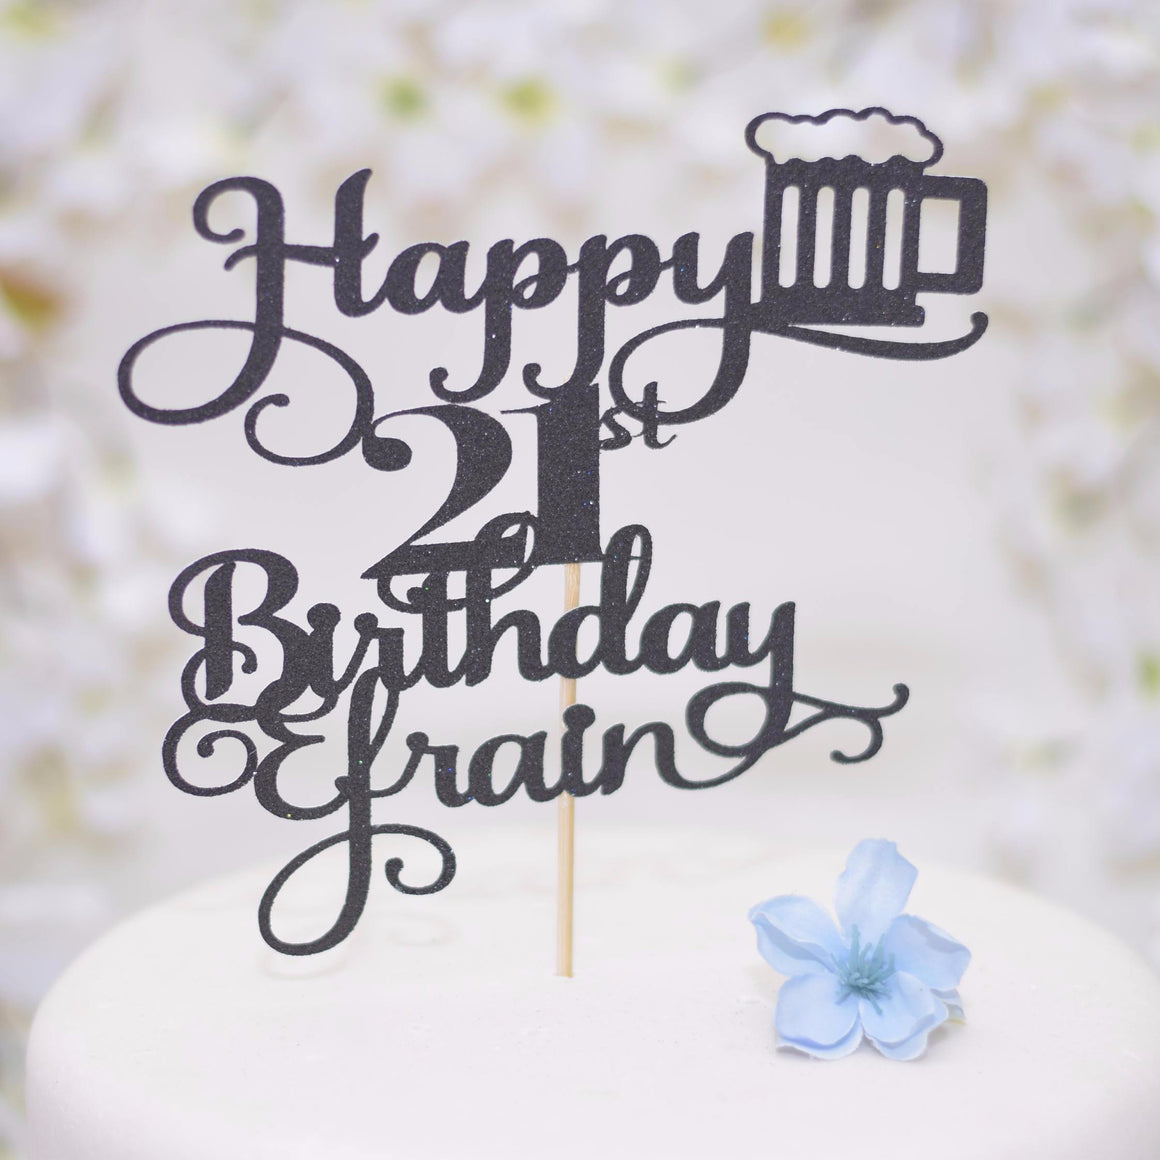 Happy 21st birthday Efrain with beer details black glitter cake topper